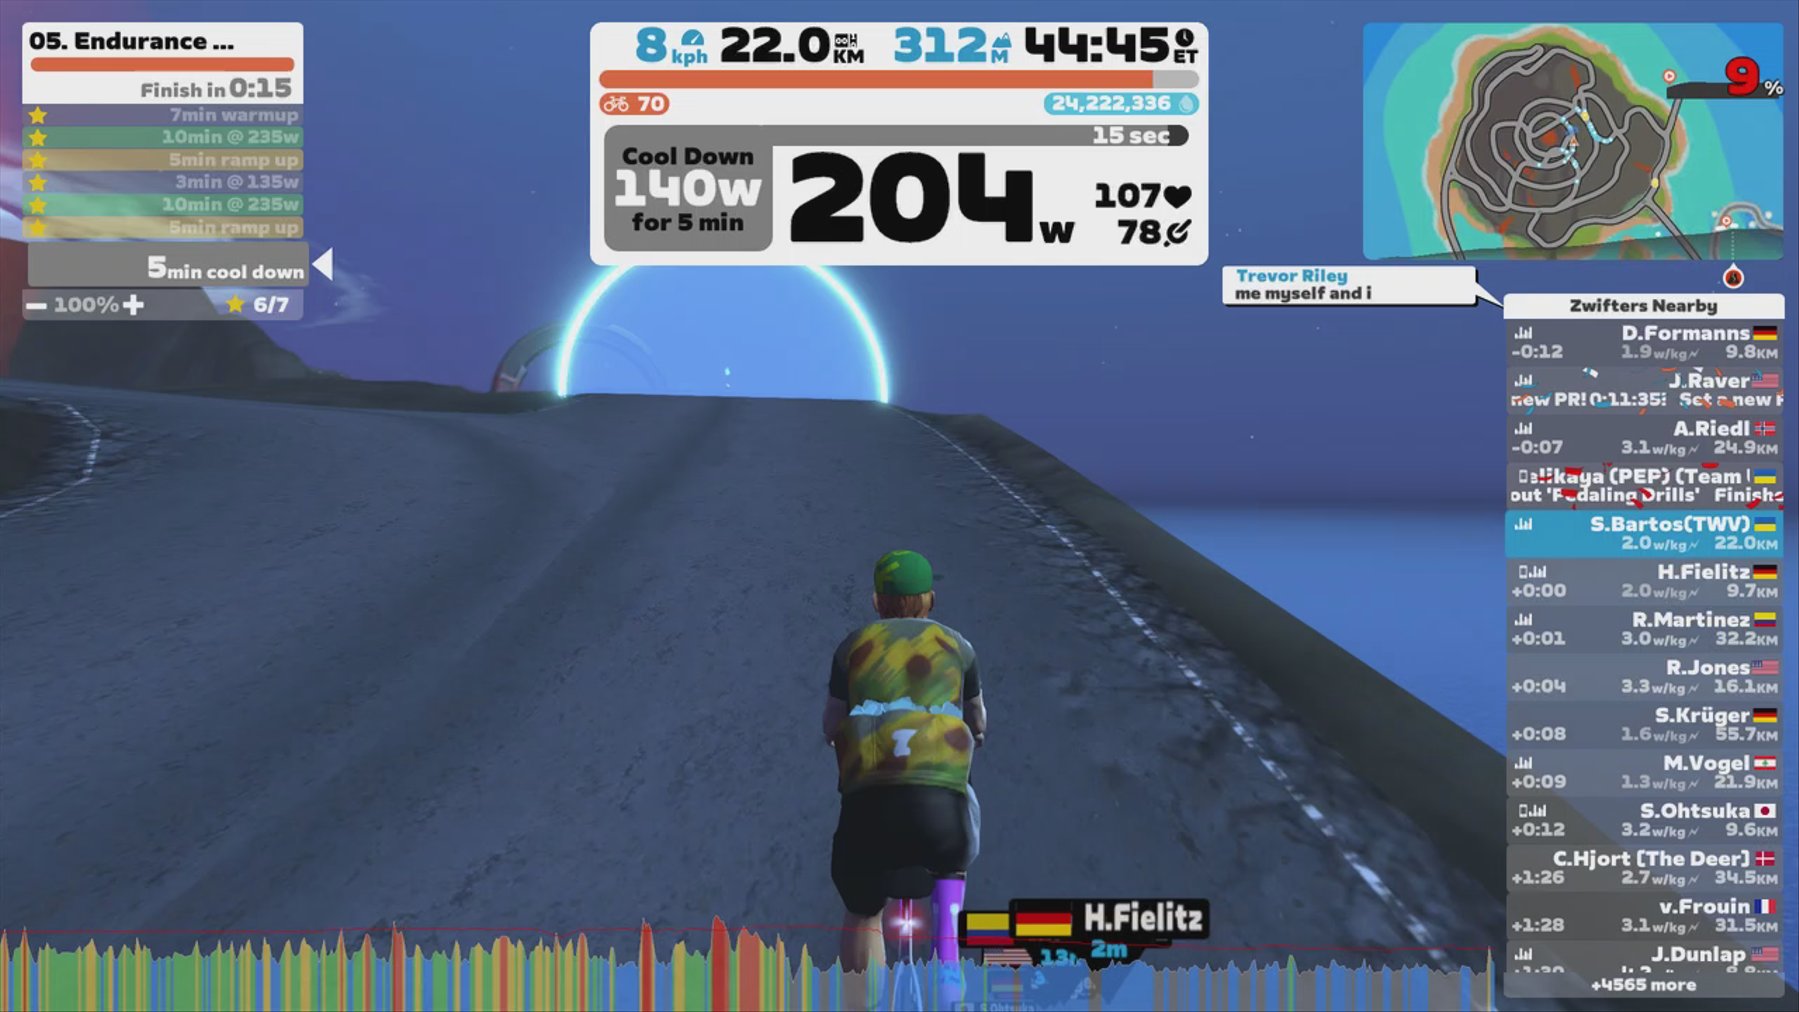 Zwift - 05. Endurance Ascent in Watopia